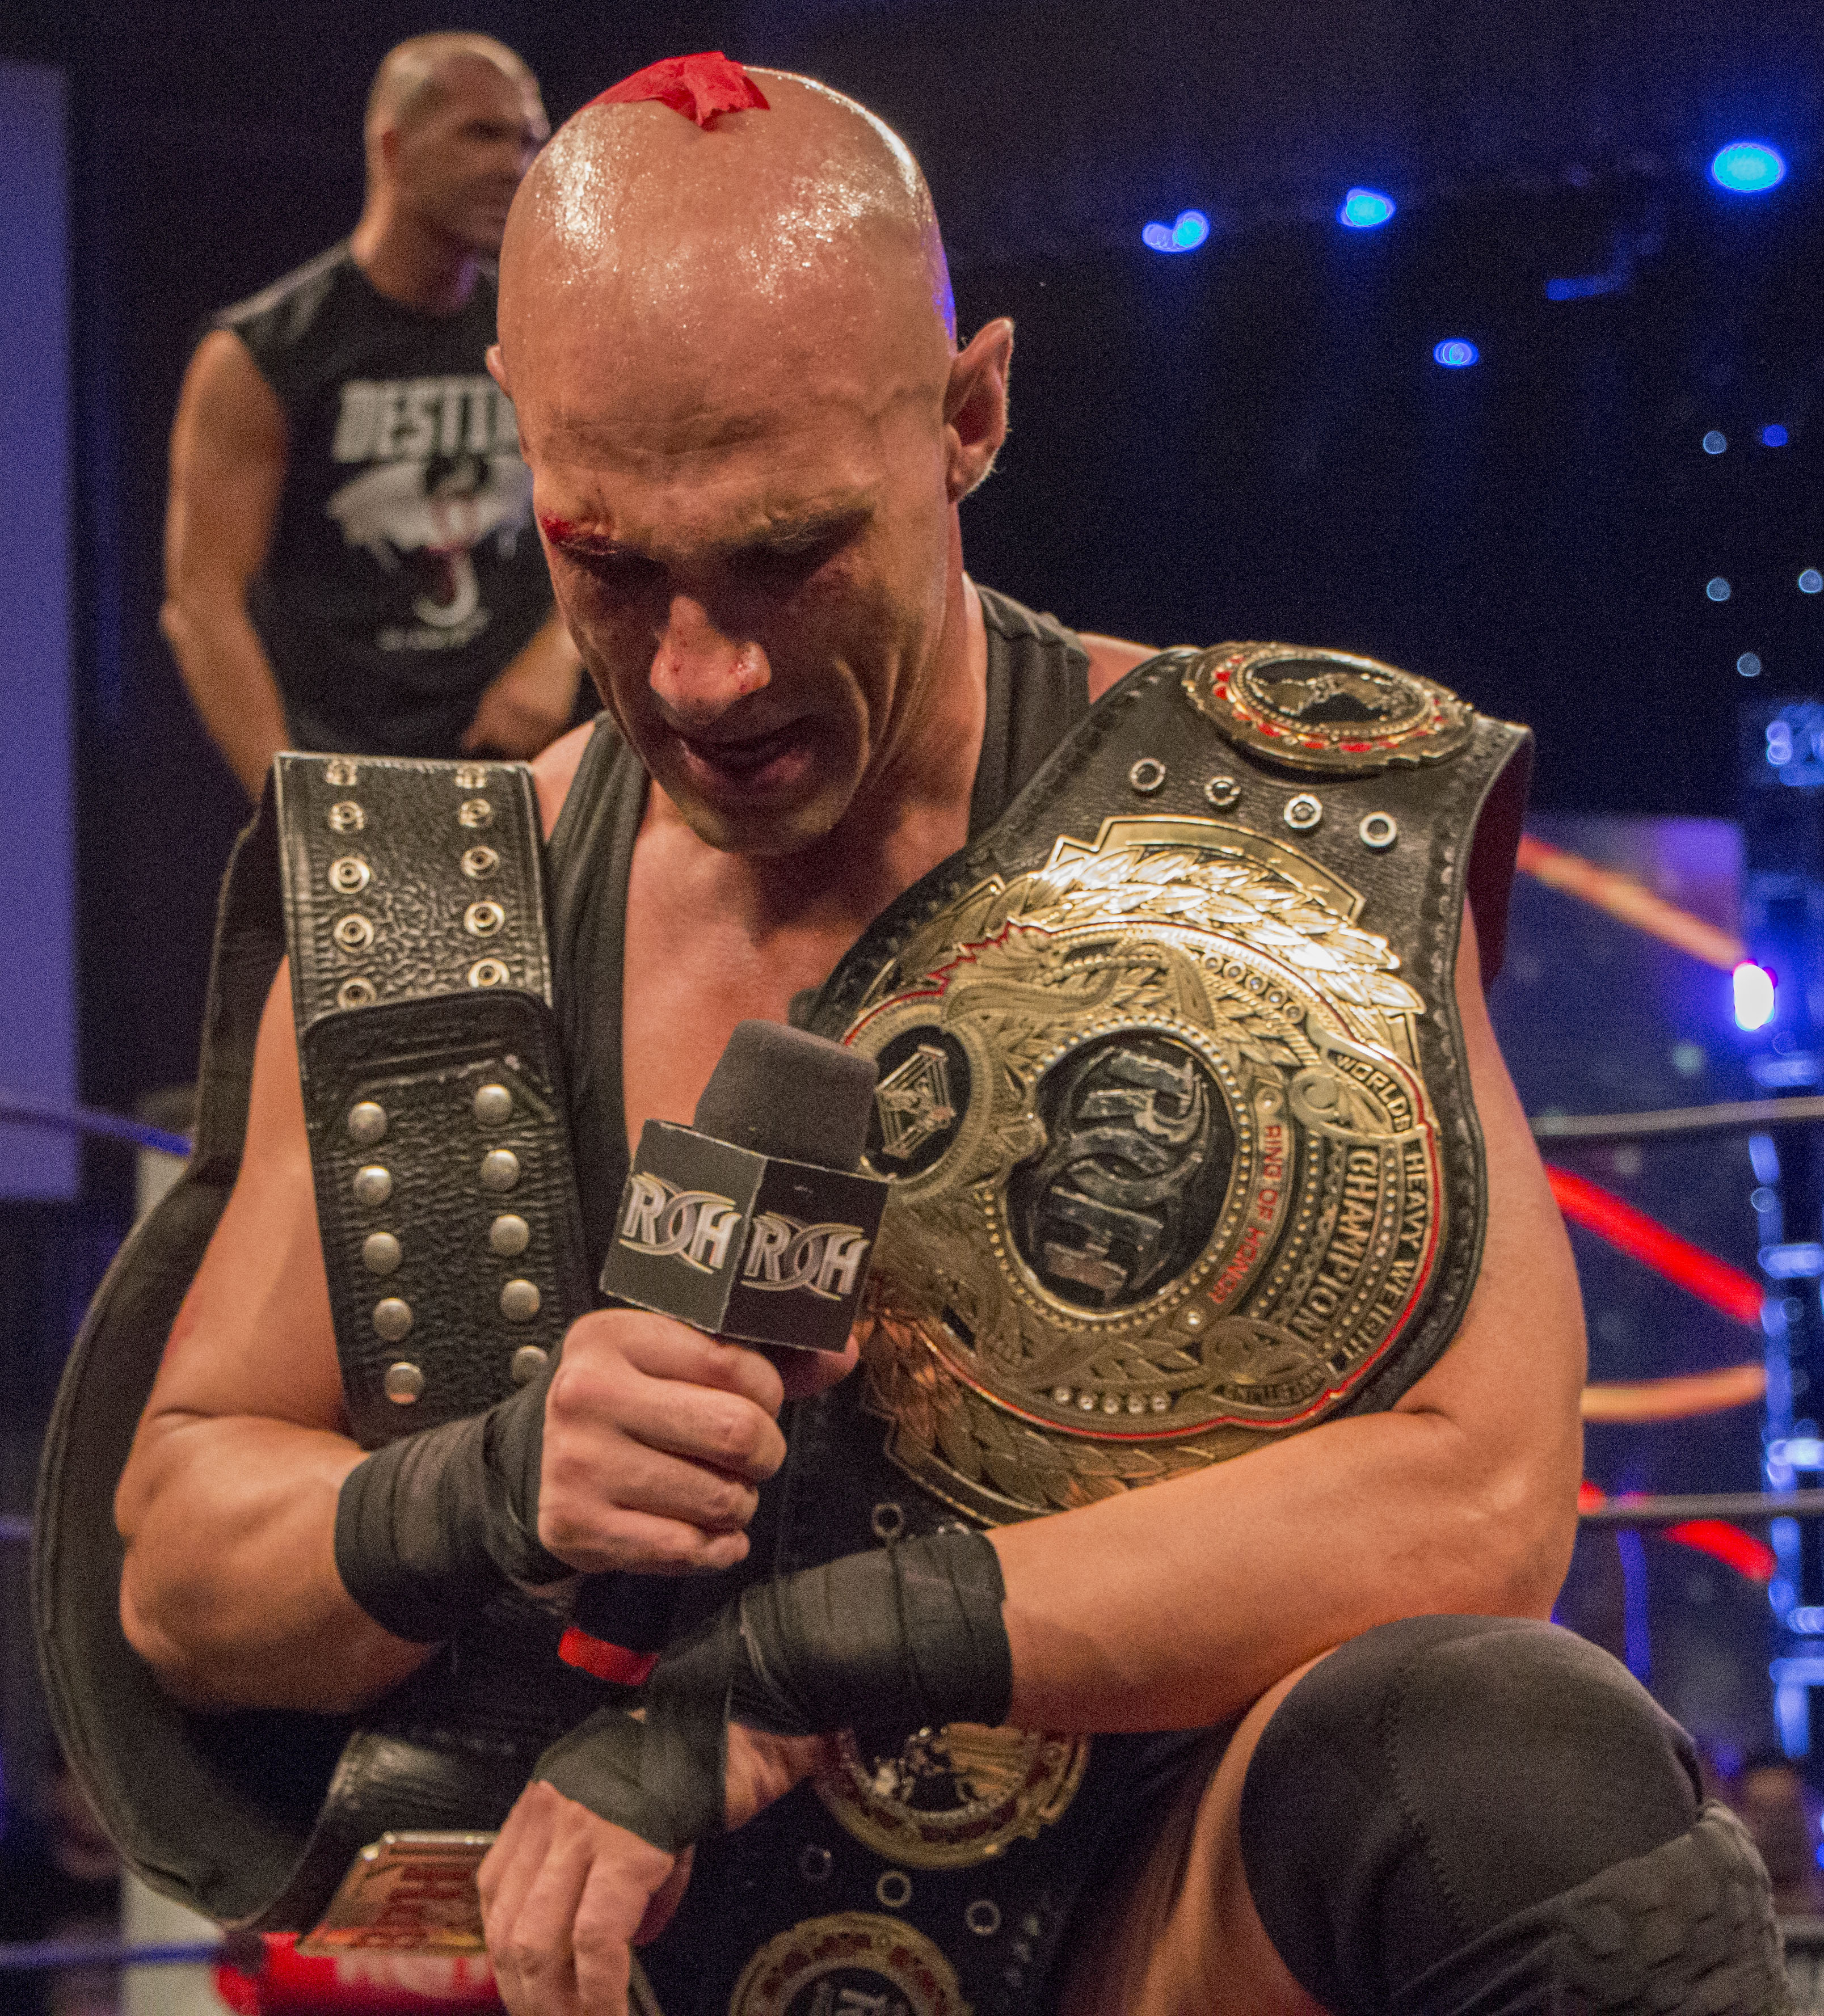 Photo courtesy of Ring of Honor